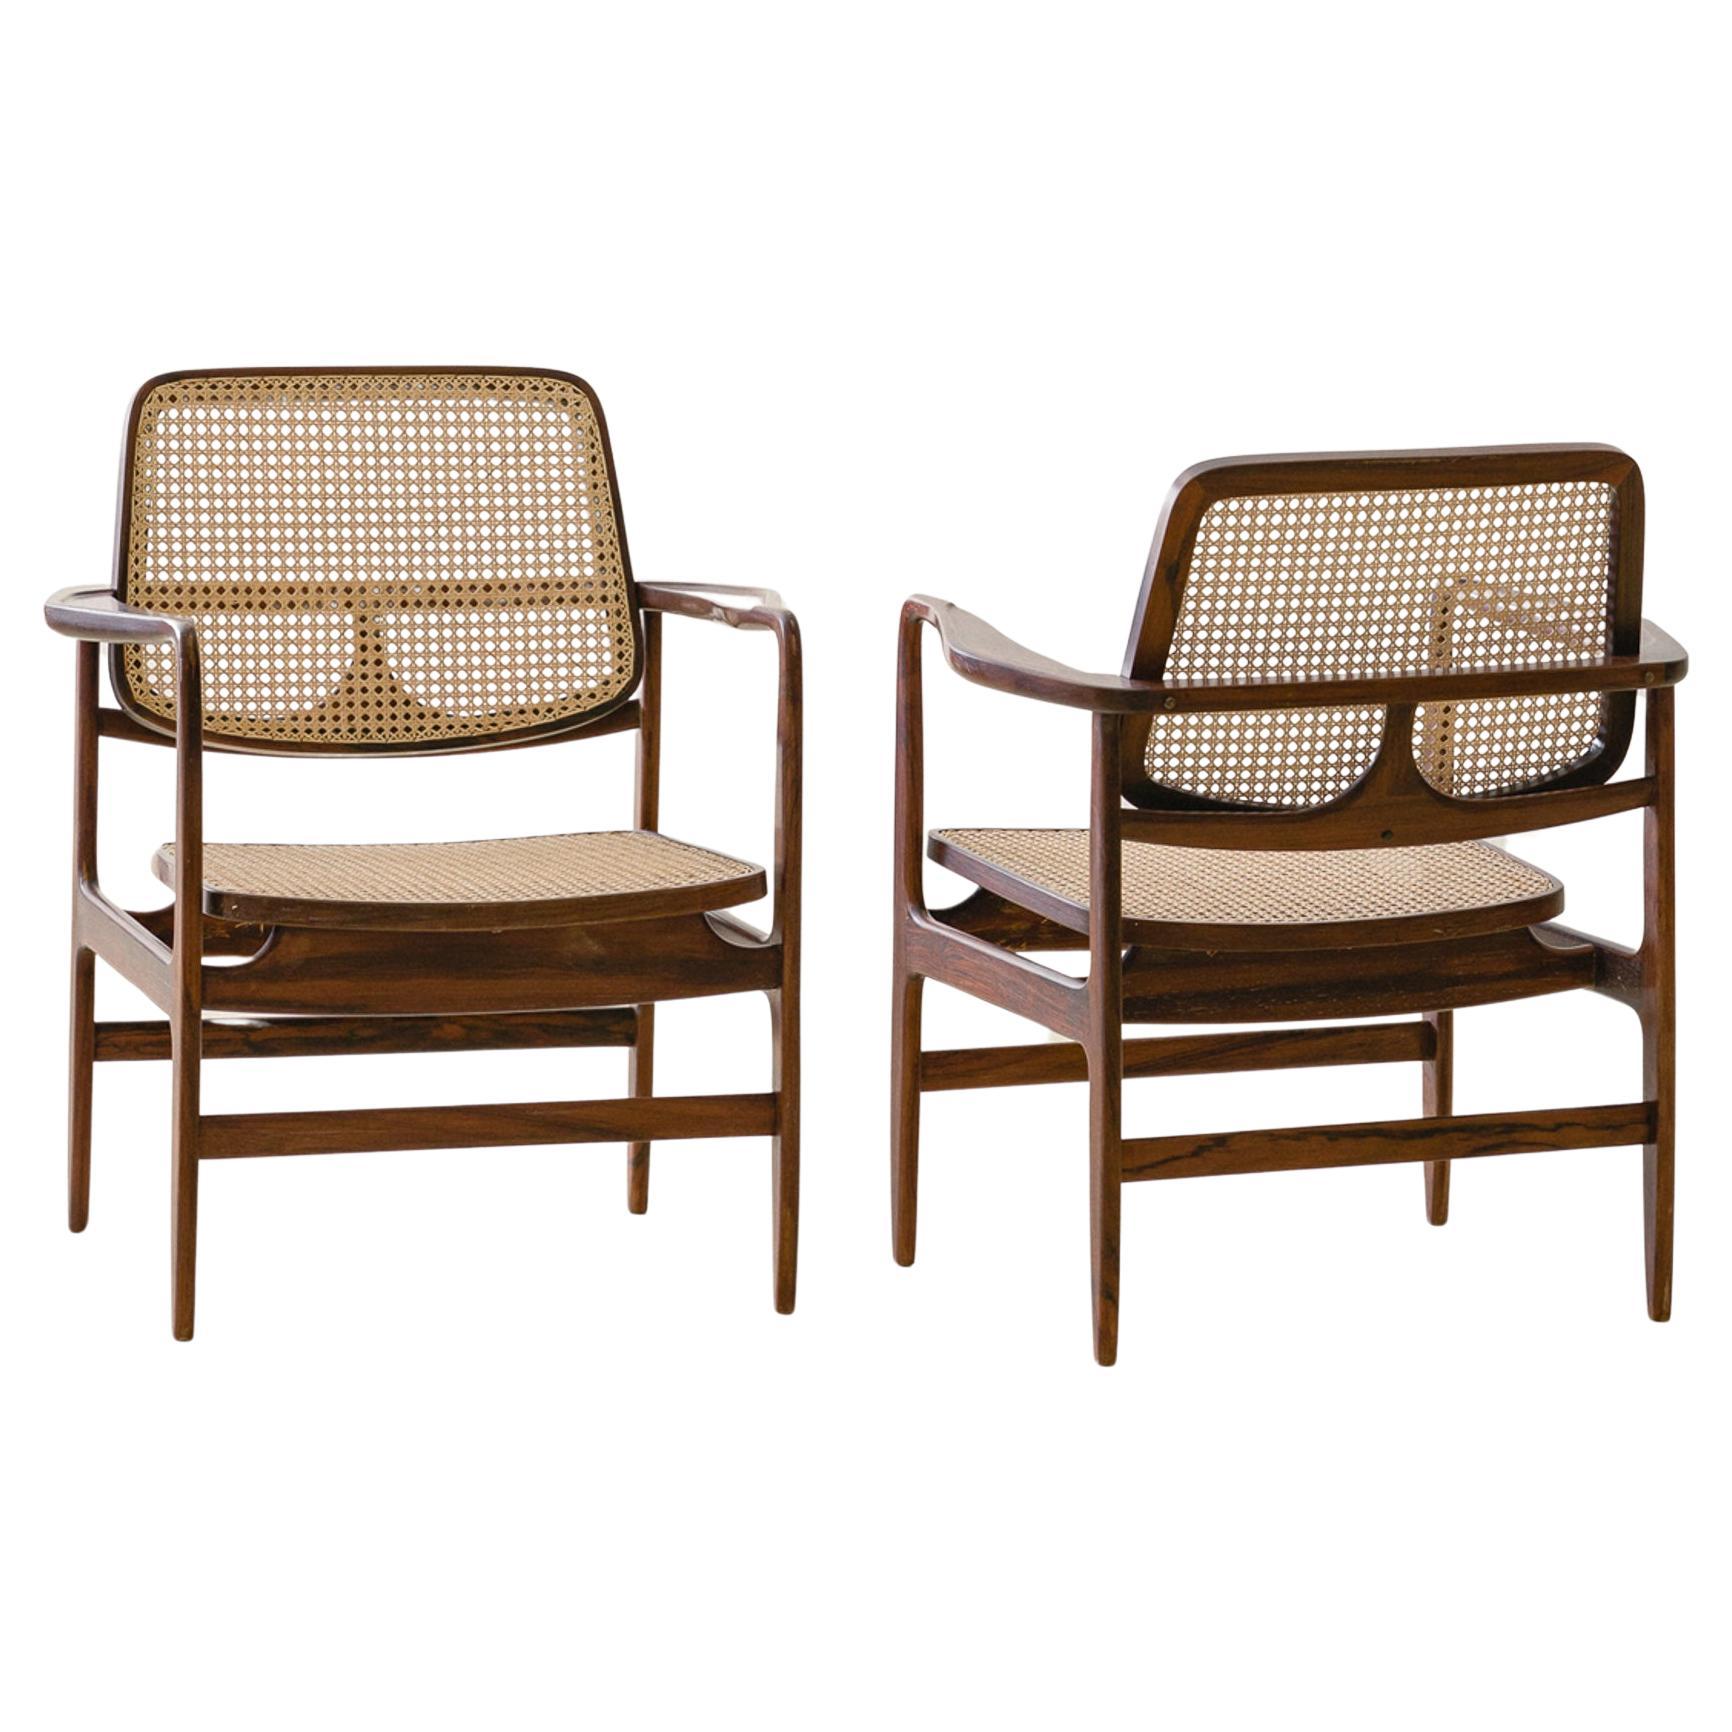 Pair of "Oscar" Armchairs by Sergio Rodrigues, Brazilian Midcentury Design, 1956 For Sale